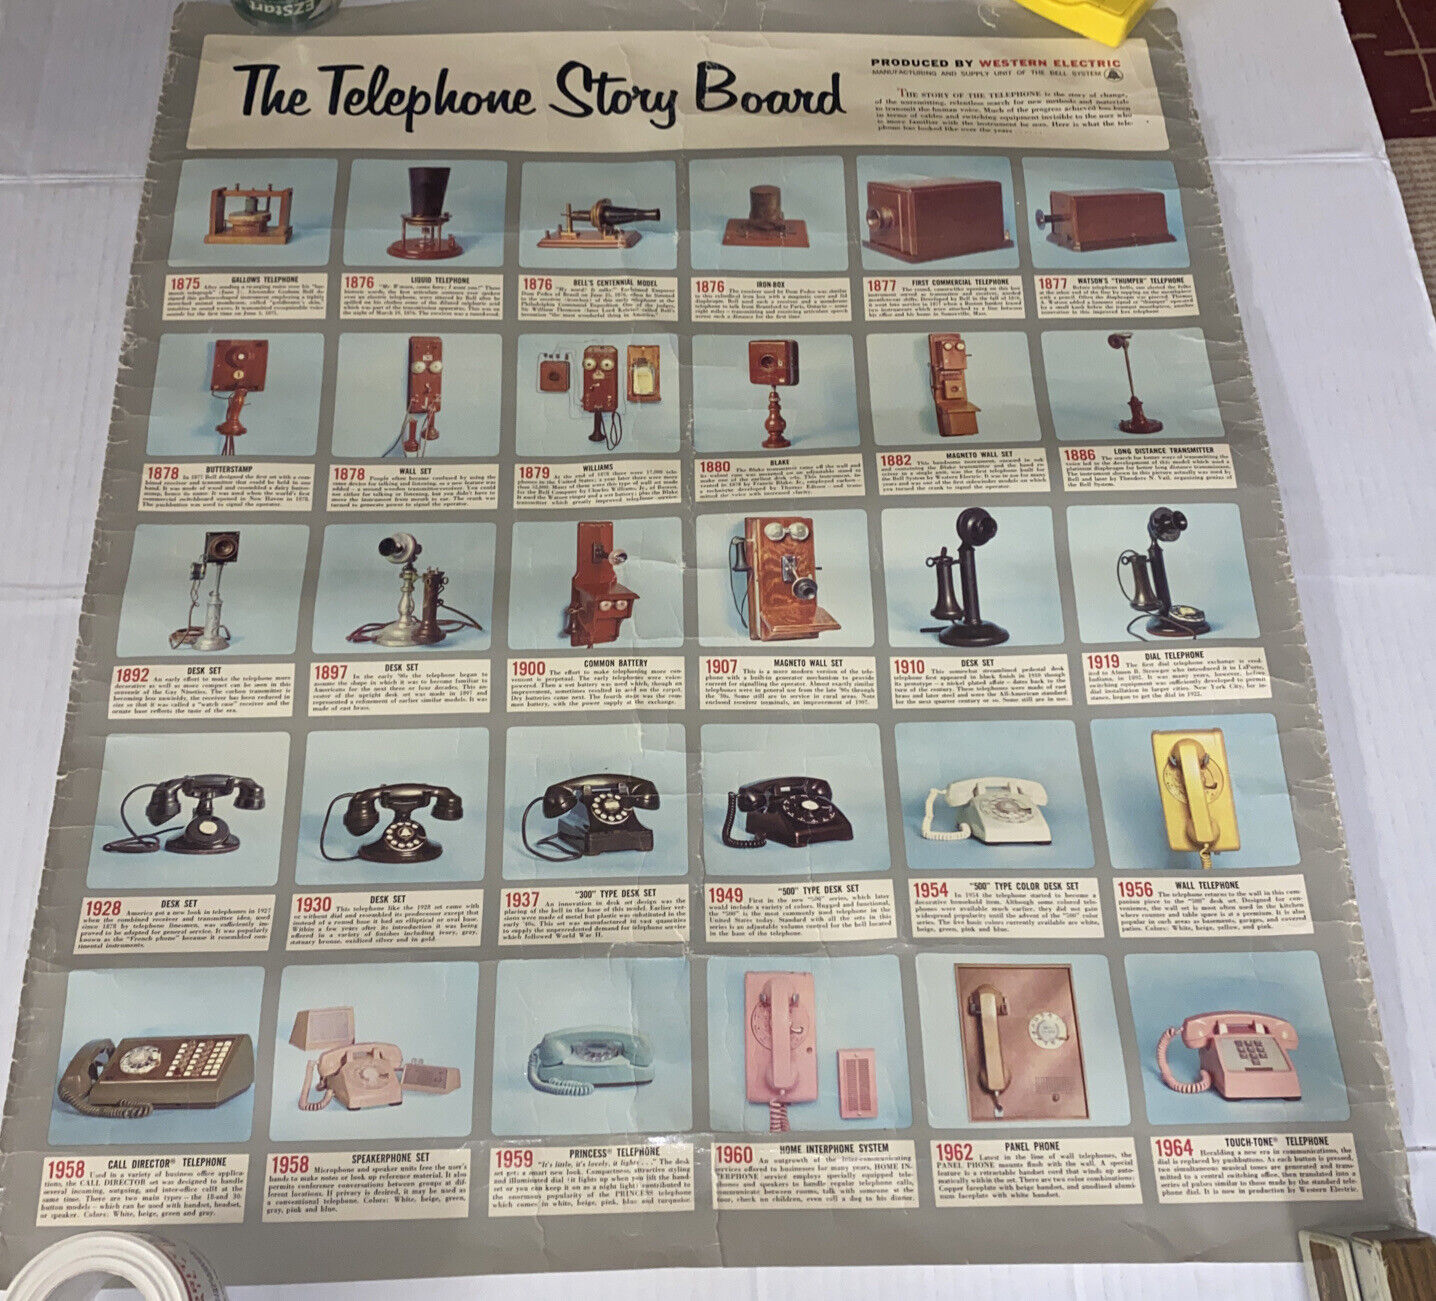 Auth Vintage Poster 1960s Bell System Western Electric Telephone Story BOARD SEE